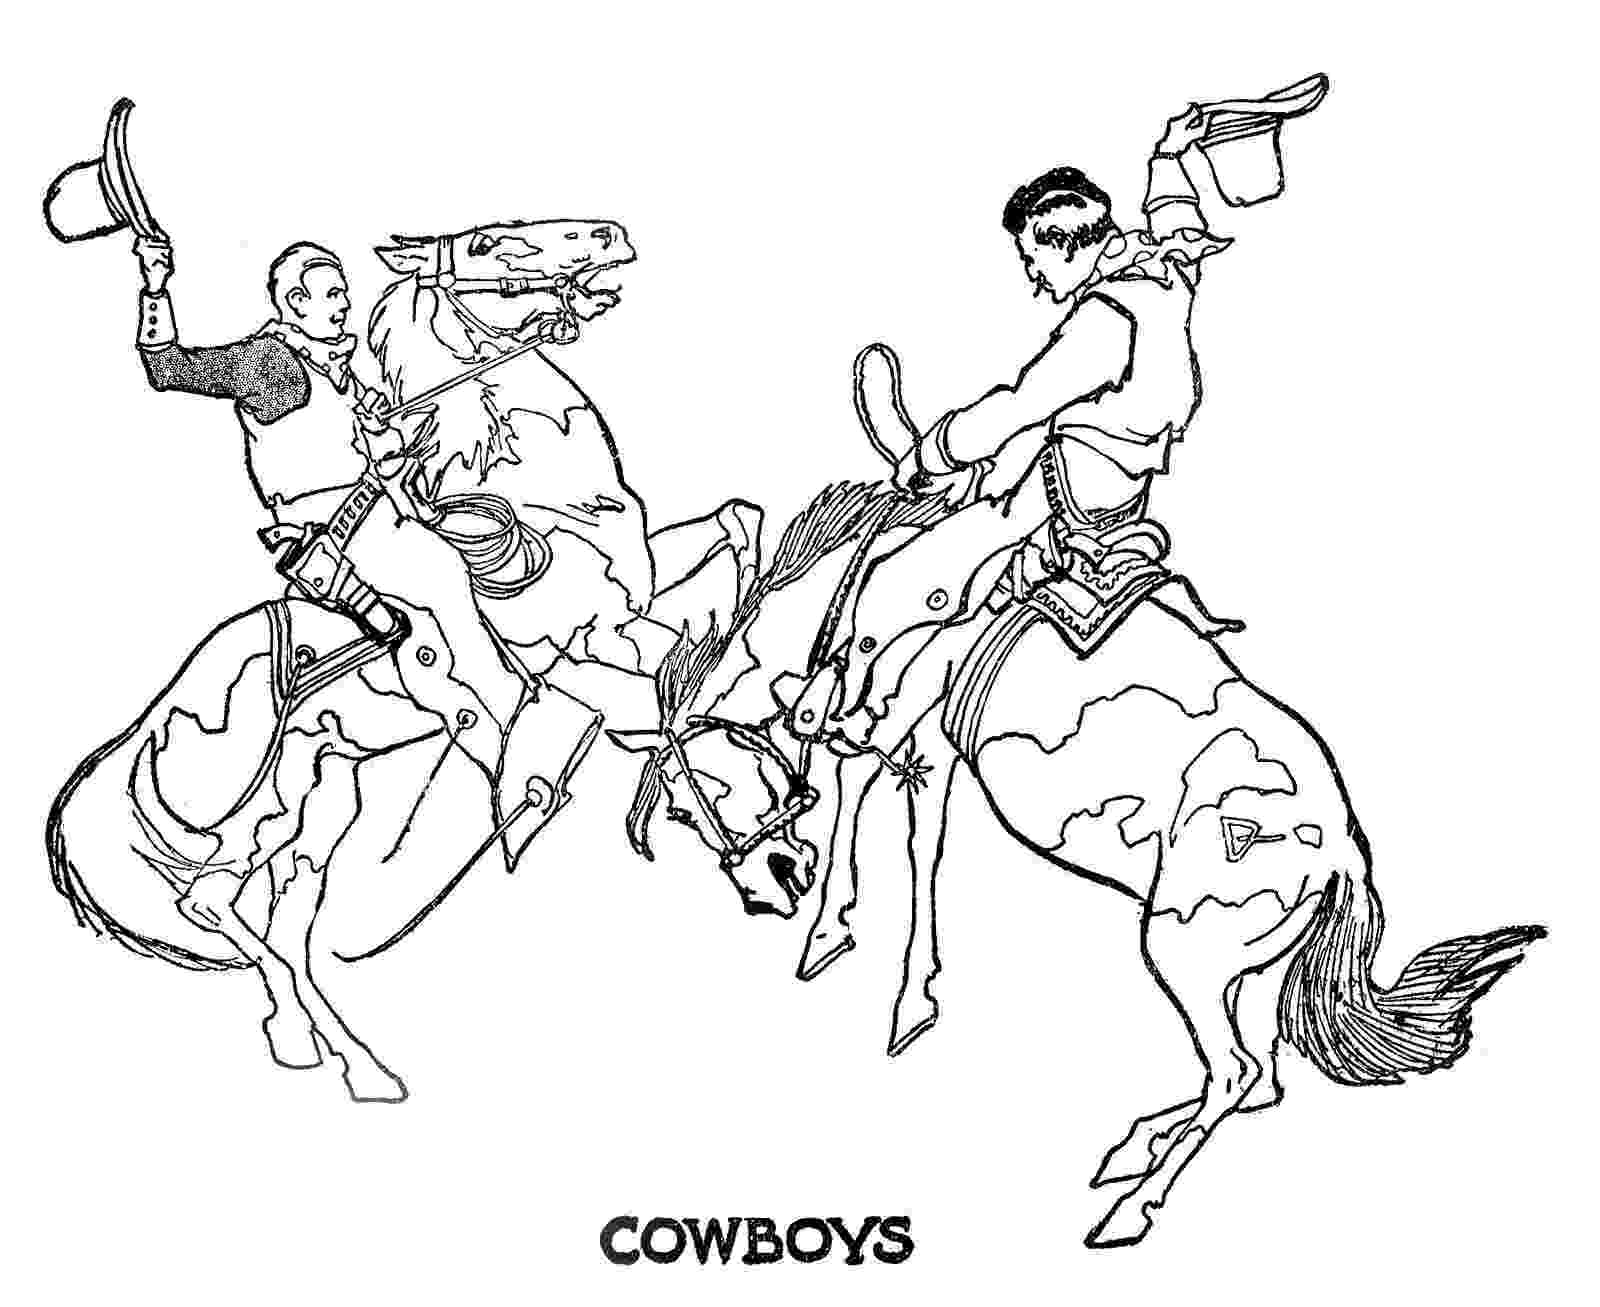 cowboy coloring pages thursday is request day bear golf cowboys cowgirls pages cowboy coloring 